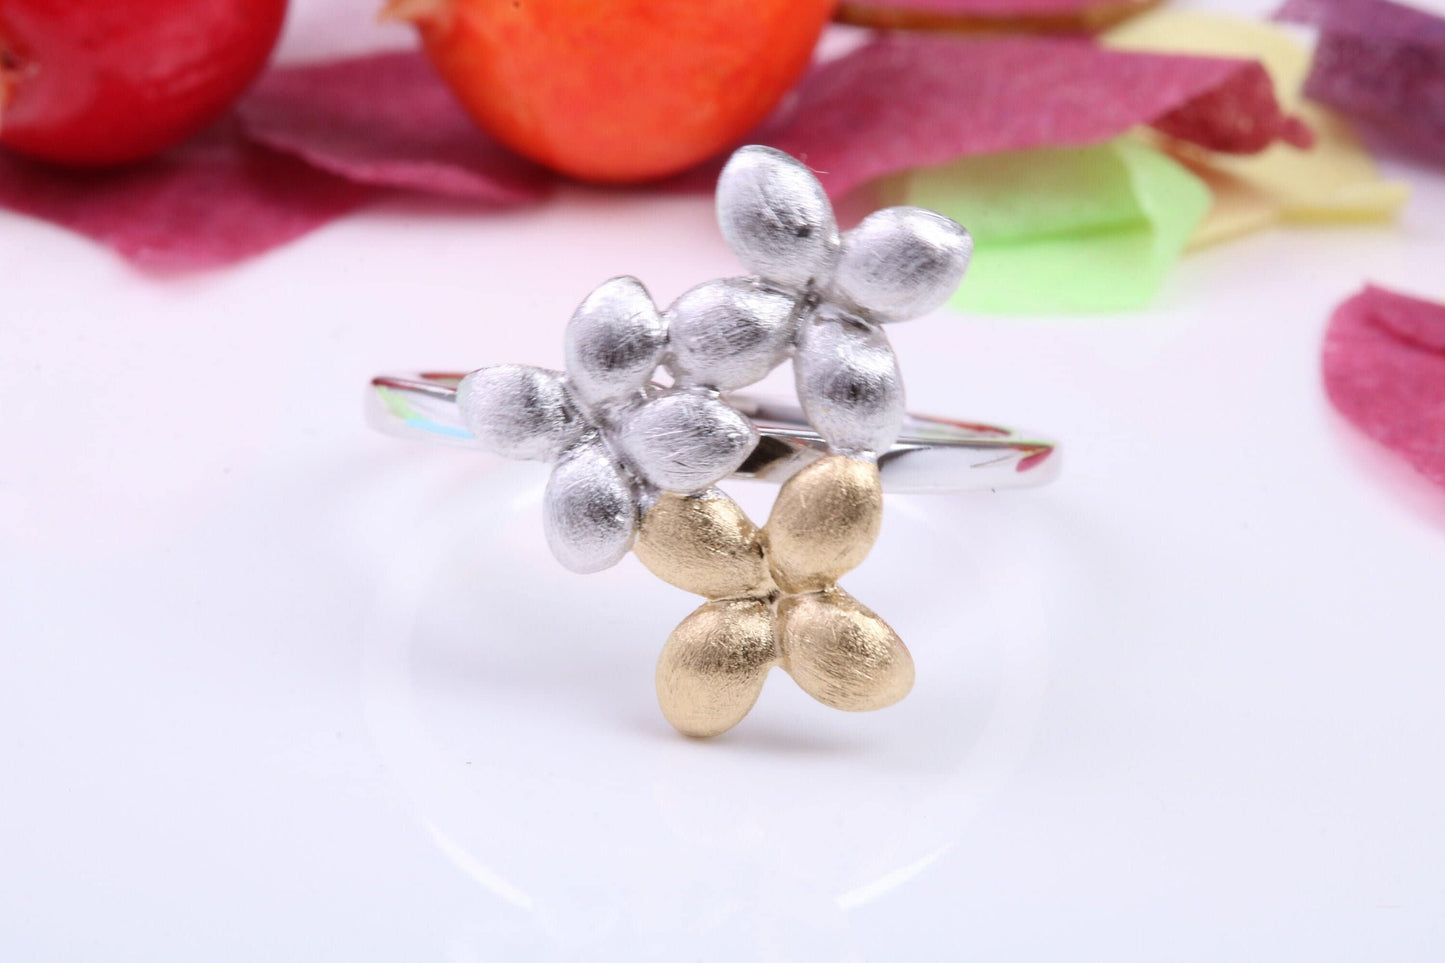 Flower Leaf Dress Ring, Made from solid Silver, Two Tone Finished